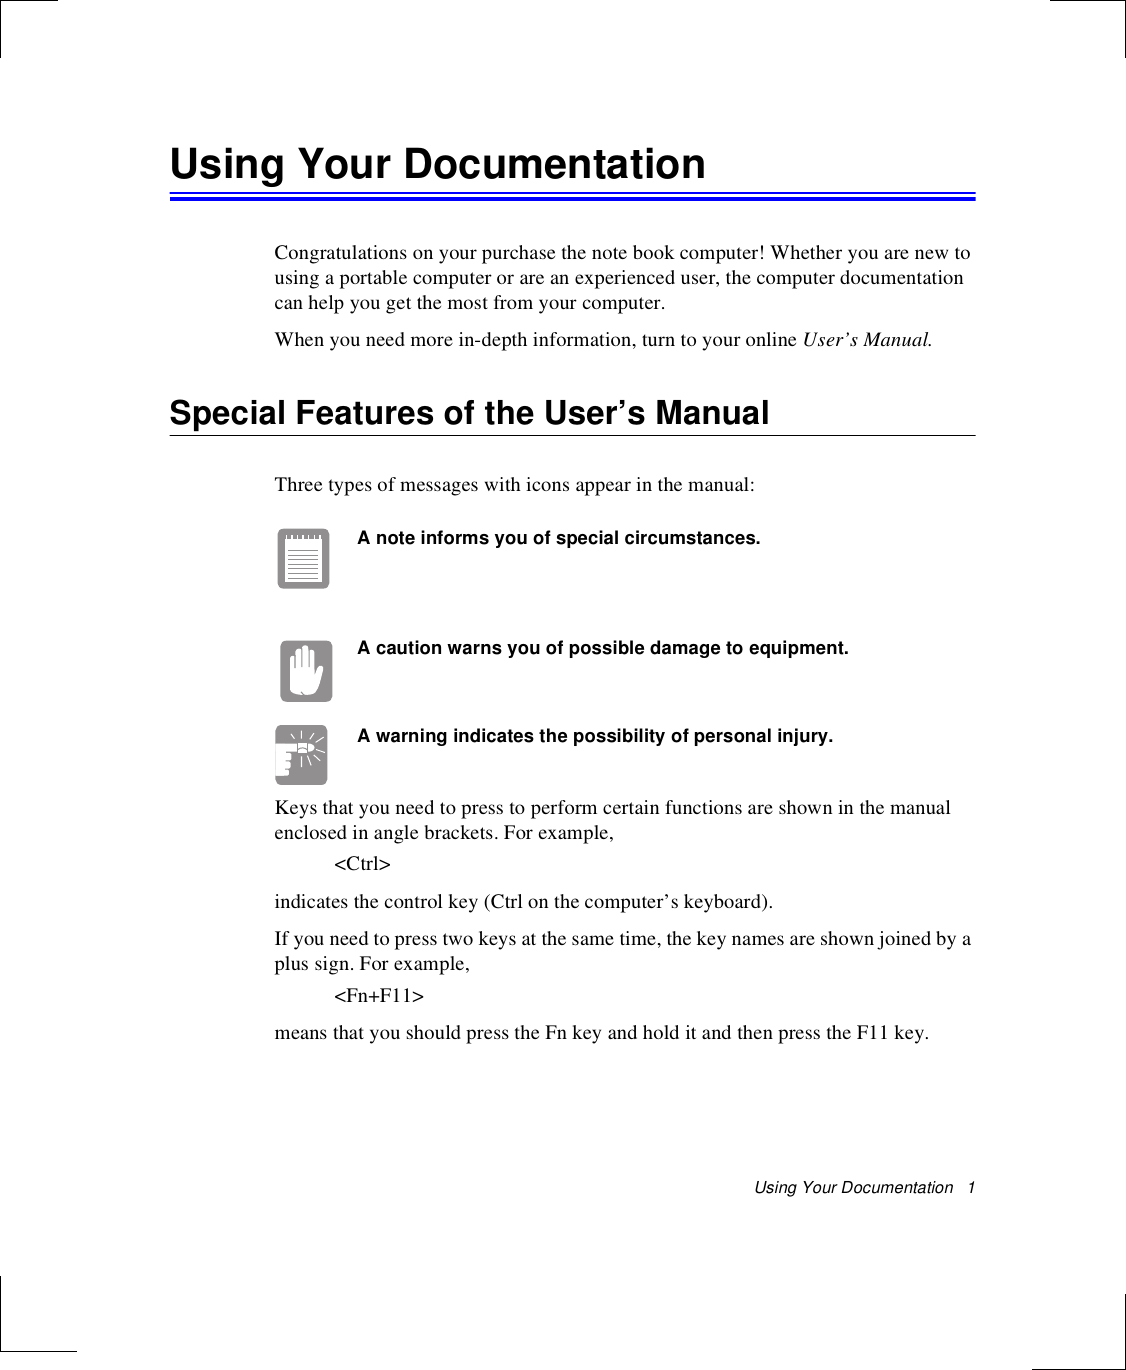 Using Your Documentation   1Using Your DocumentationCongratulations on your purchase the note book computer! Whether you are new to using a portable computer or are an experienced user, the computer documentation can help you get the most from your computer.When you need more in-depth information, turn to your online User’s Manual.Special Features of the User’s ManualThree types of messages with icons appear in the manual:A note informs you of special circumstances.A caution warns you of possible damage to equipment.A warning indicates the possibility of personal injury.Keys that you need to press to perform certain functions are shown in the manual enclosed in angle brackets. For example, &lt;Ctrl&gt;indicates the control key (Ctrl on the computer’s keyboard). If you need to press two keys at the same time, the key names are shown joined by a plus sign. For example,&lt;Fn+F11&gt;means that you should press the Fn key and hold it and then press the F11 key. 